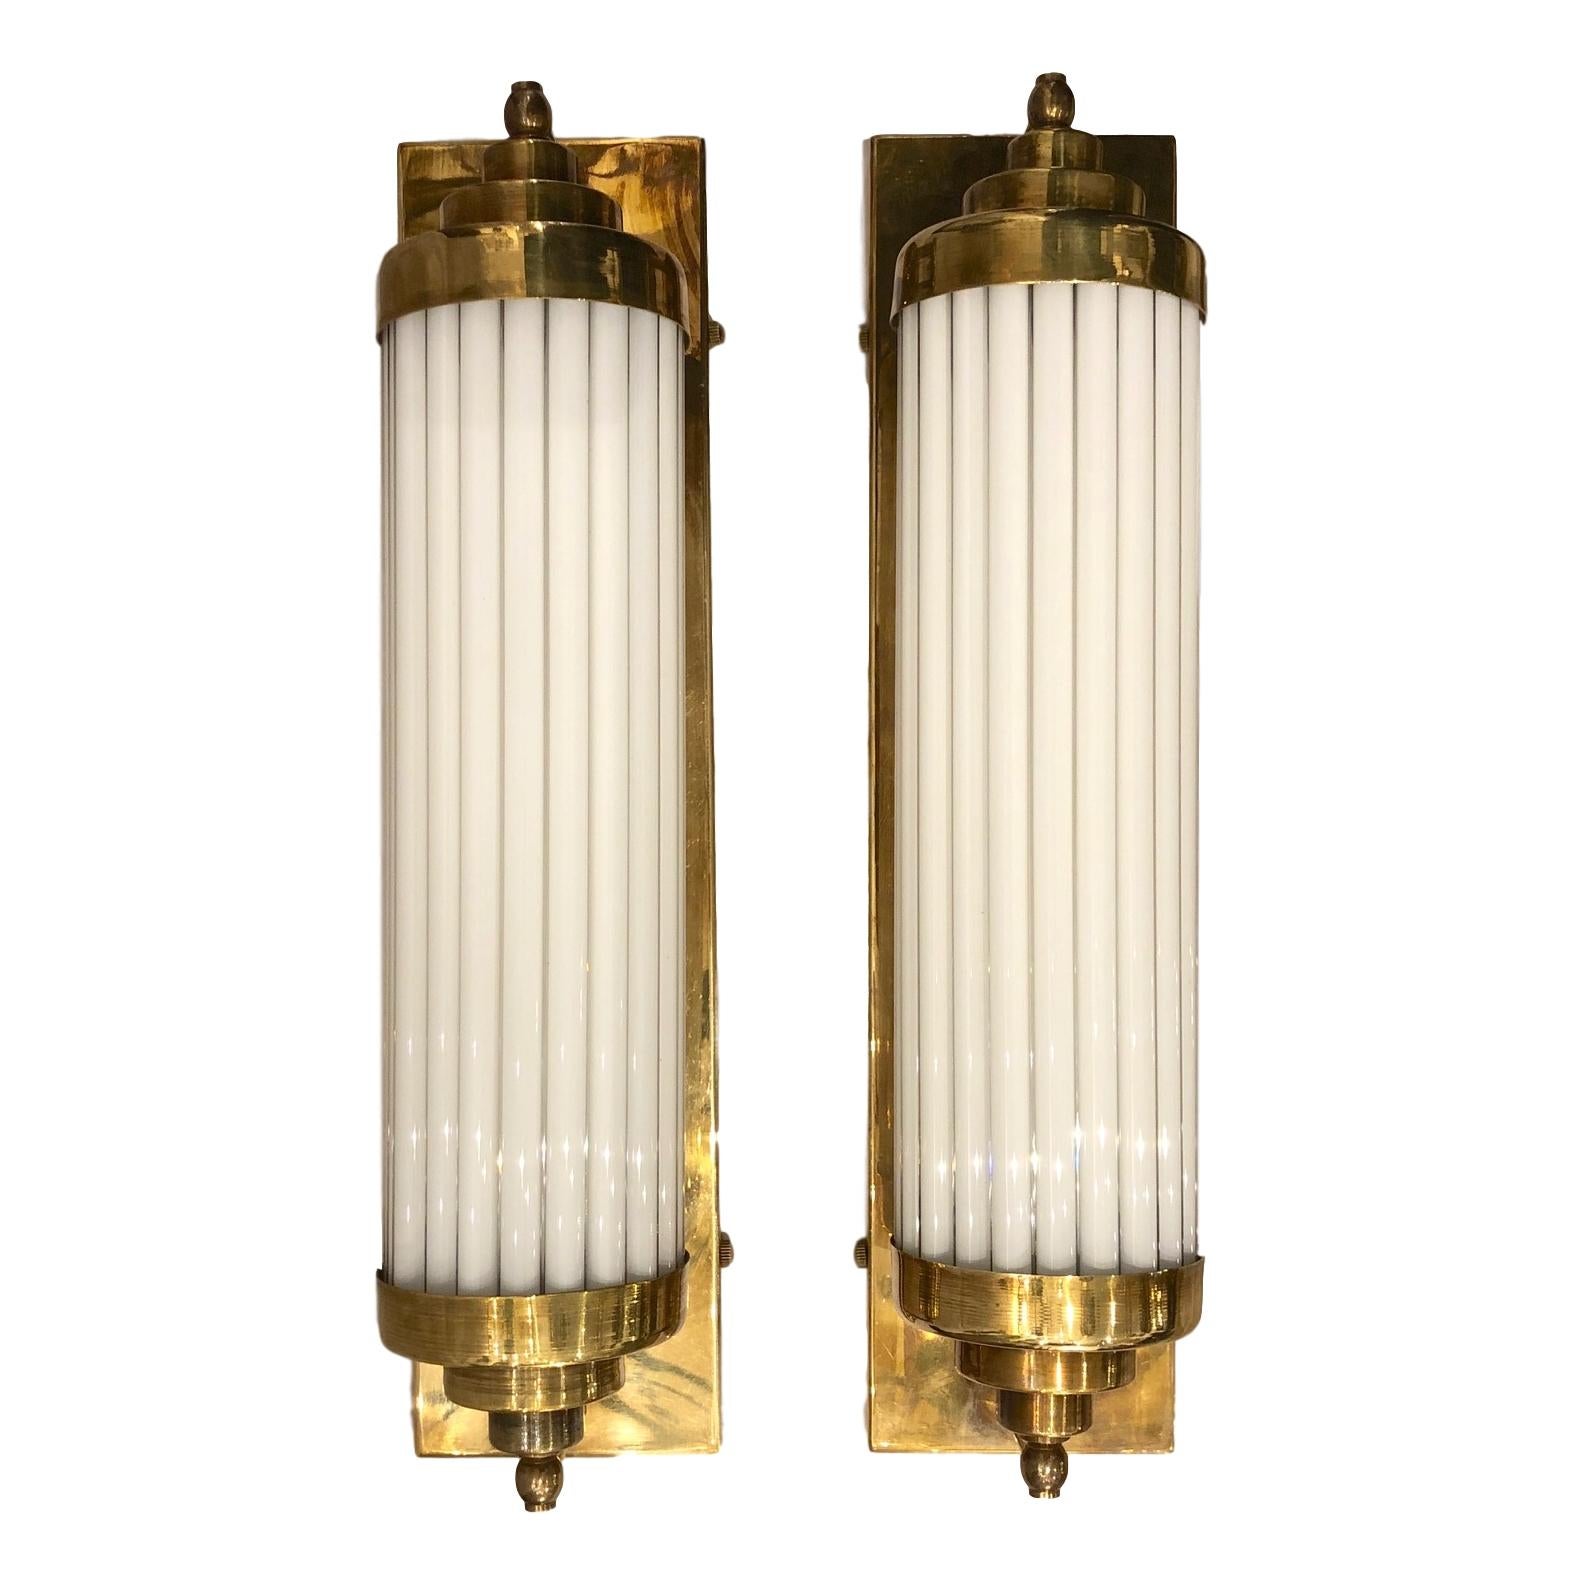 Set of 4 French circa 1950s French opaline glass rods sconces. Sold per pair.

Measurements:
Height: 17